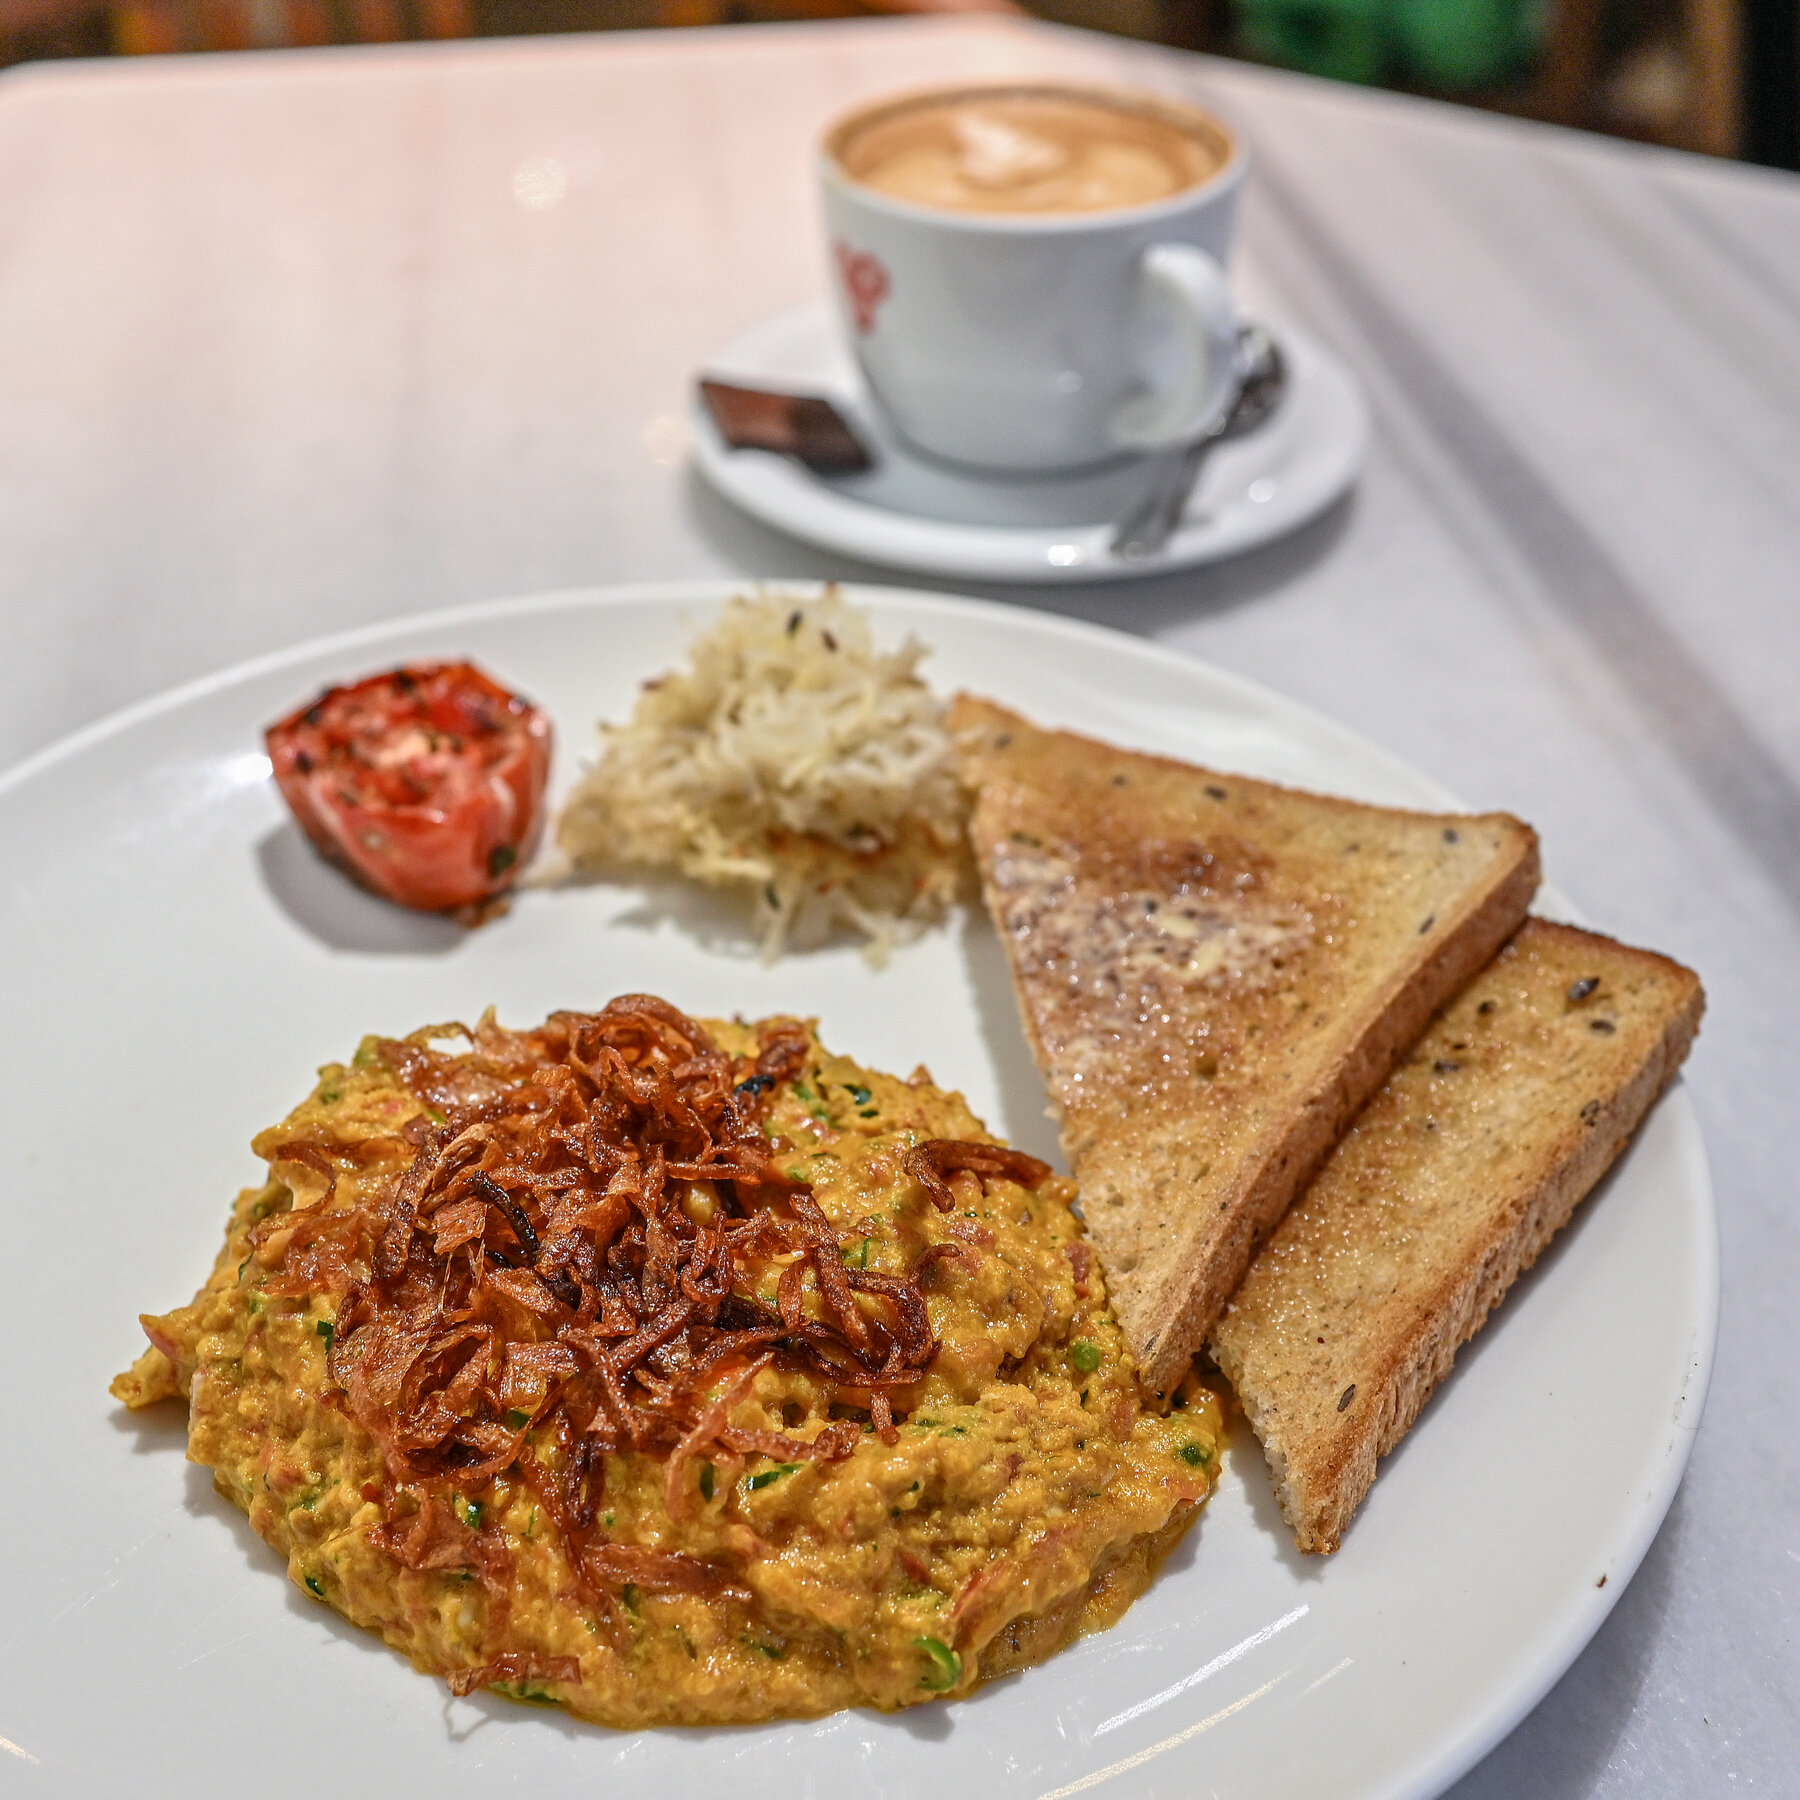 A plate of scrambled eggs, buttered toast and half a roasted tomato rests on a table. A cup of coffee with steamed milk is visible in the background on the same table. 